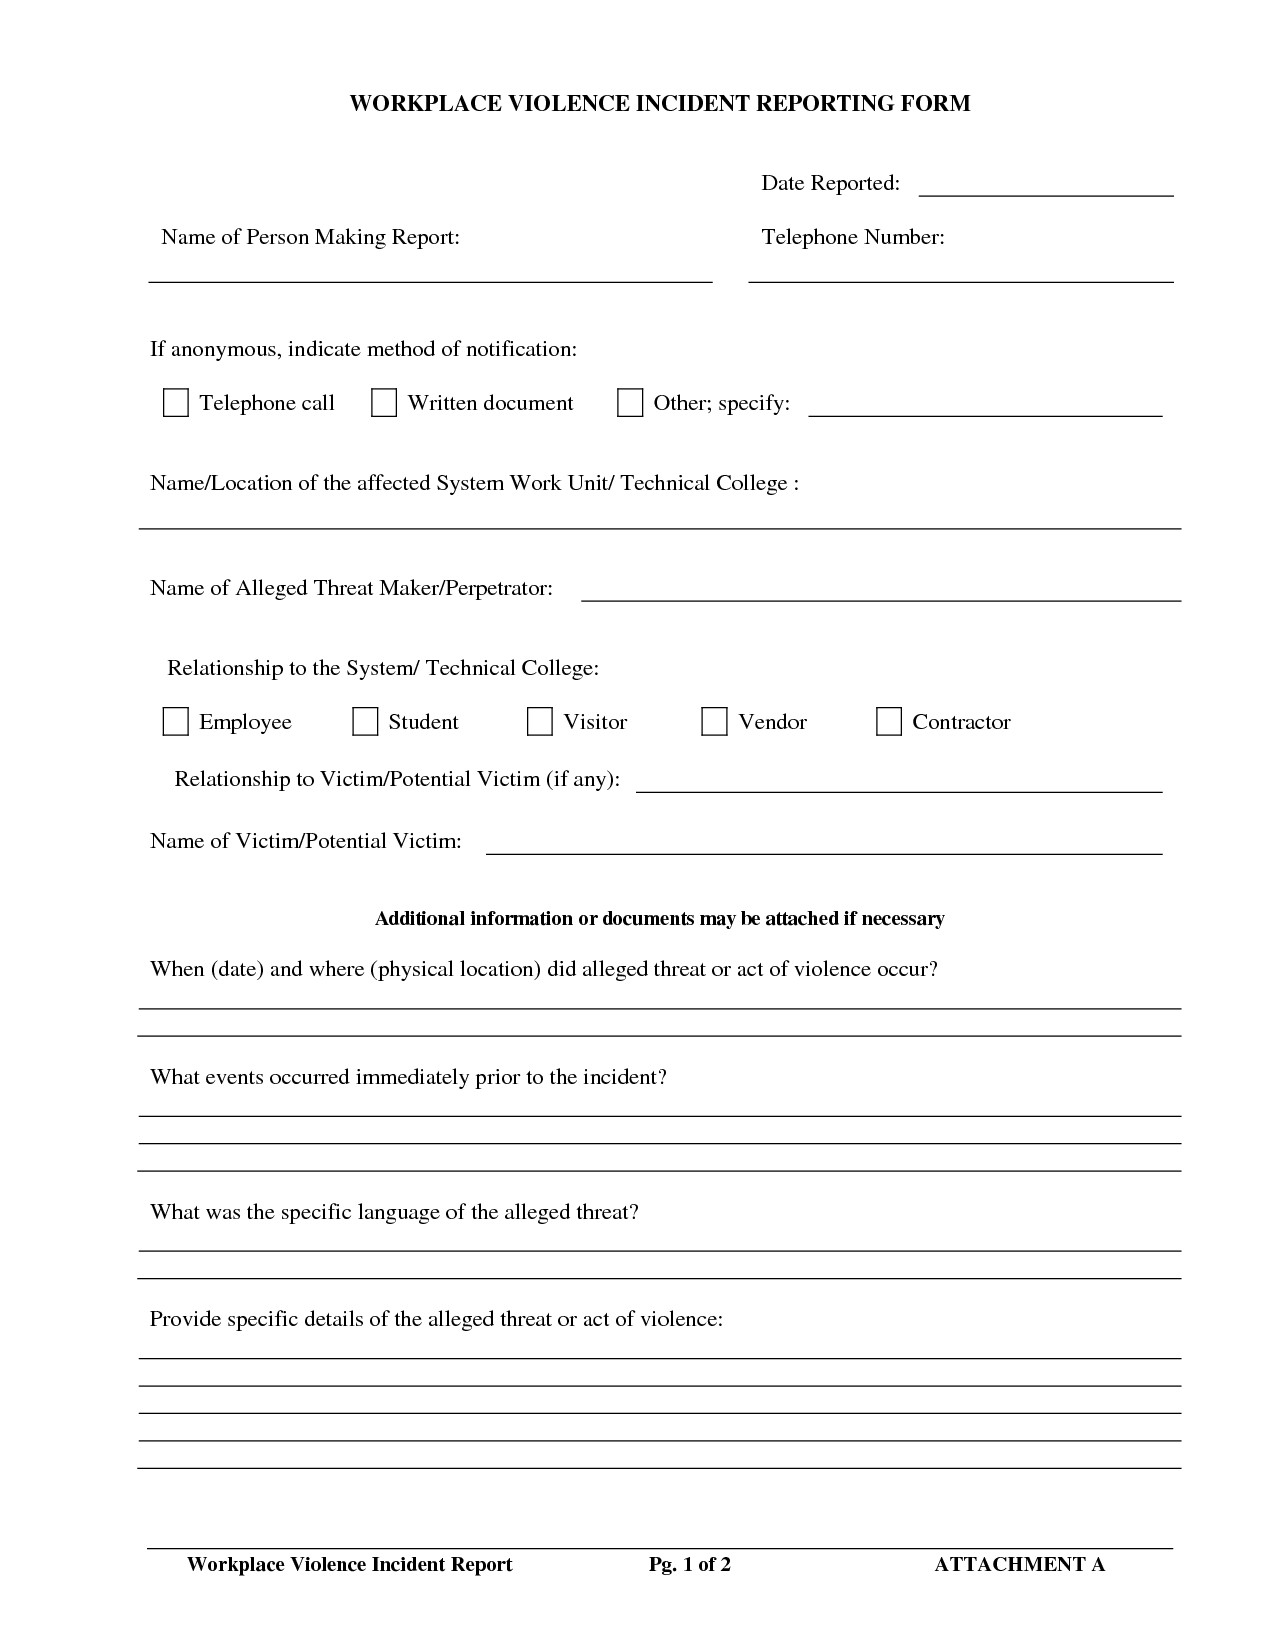 Work Incident Report Template Best S Of Work Incident Report form Workplace